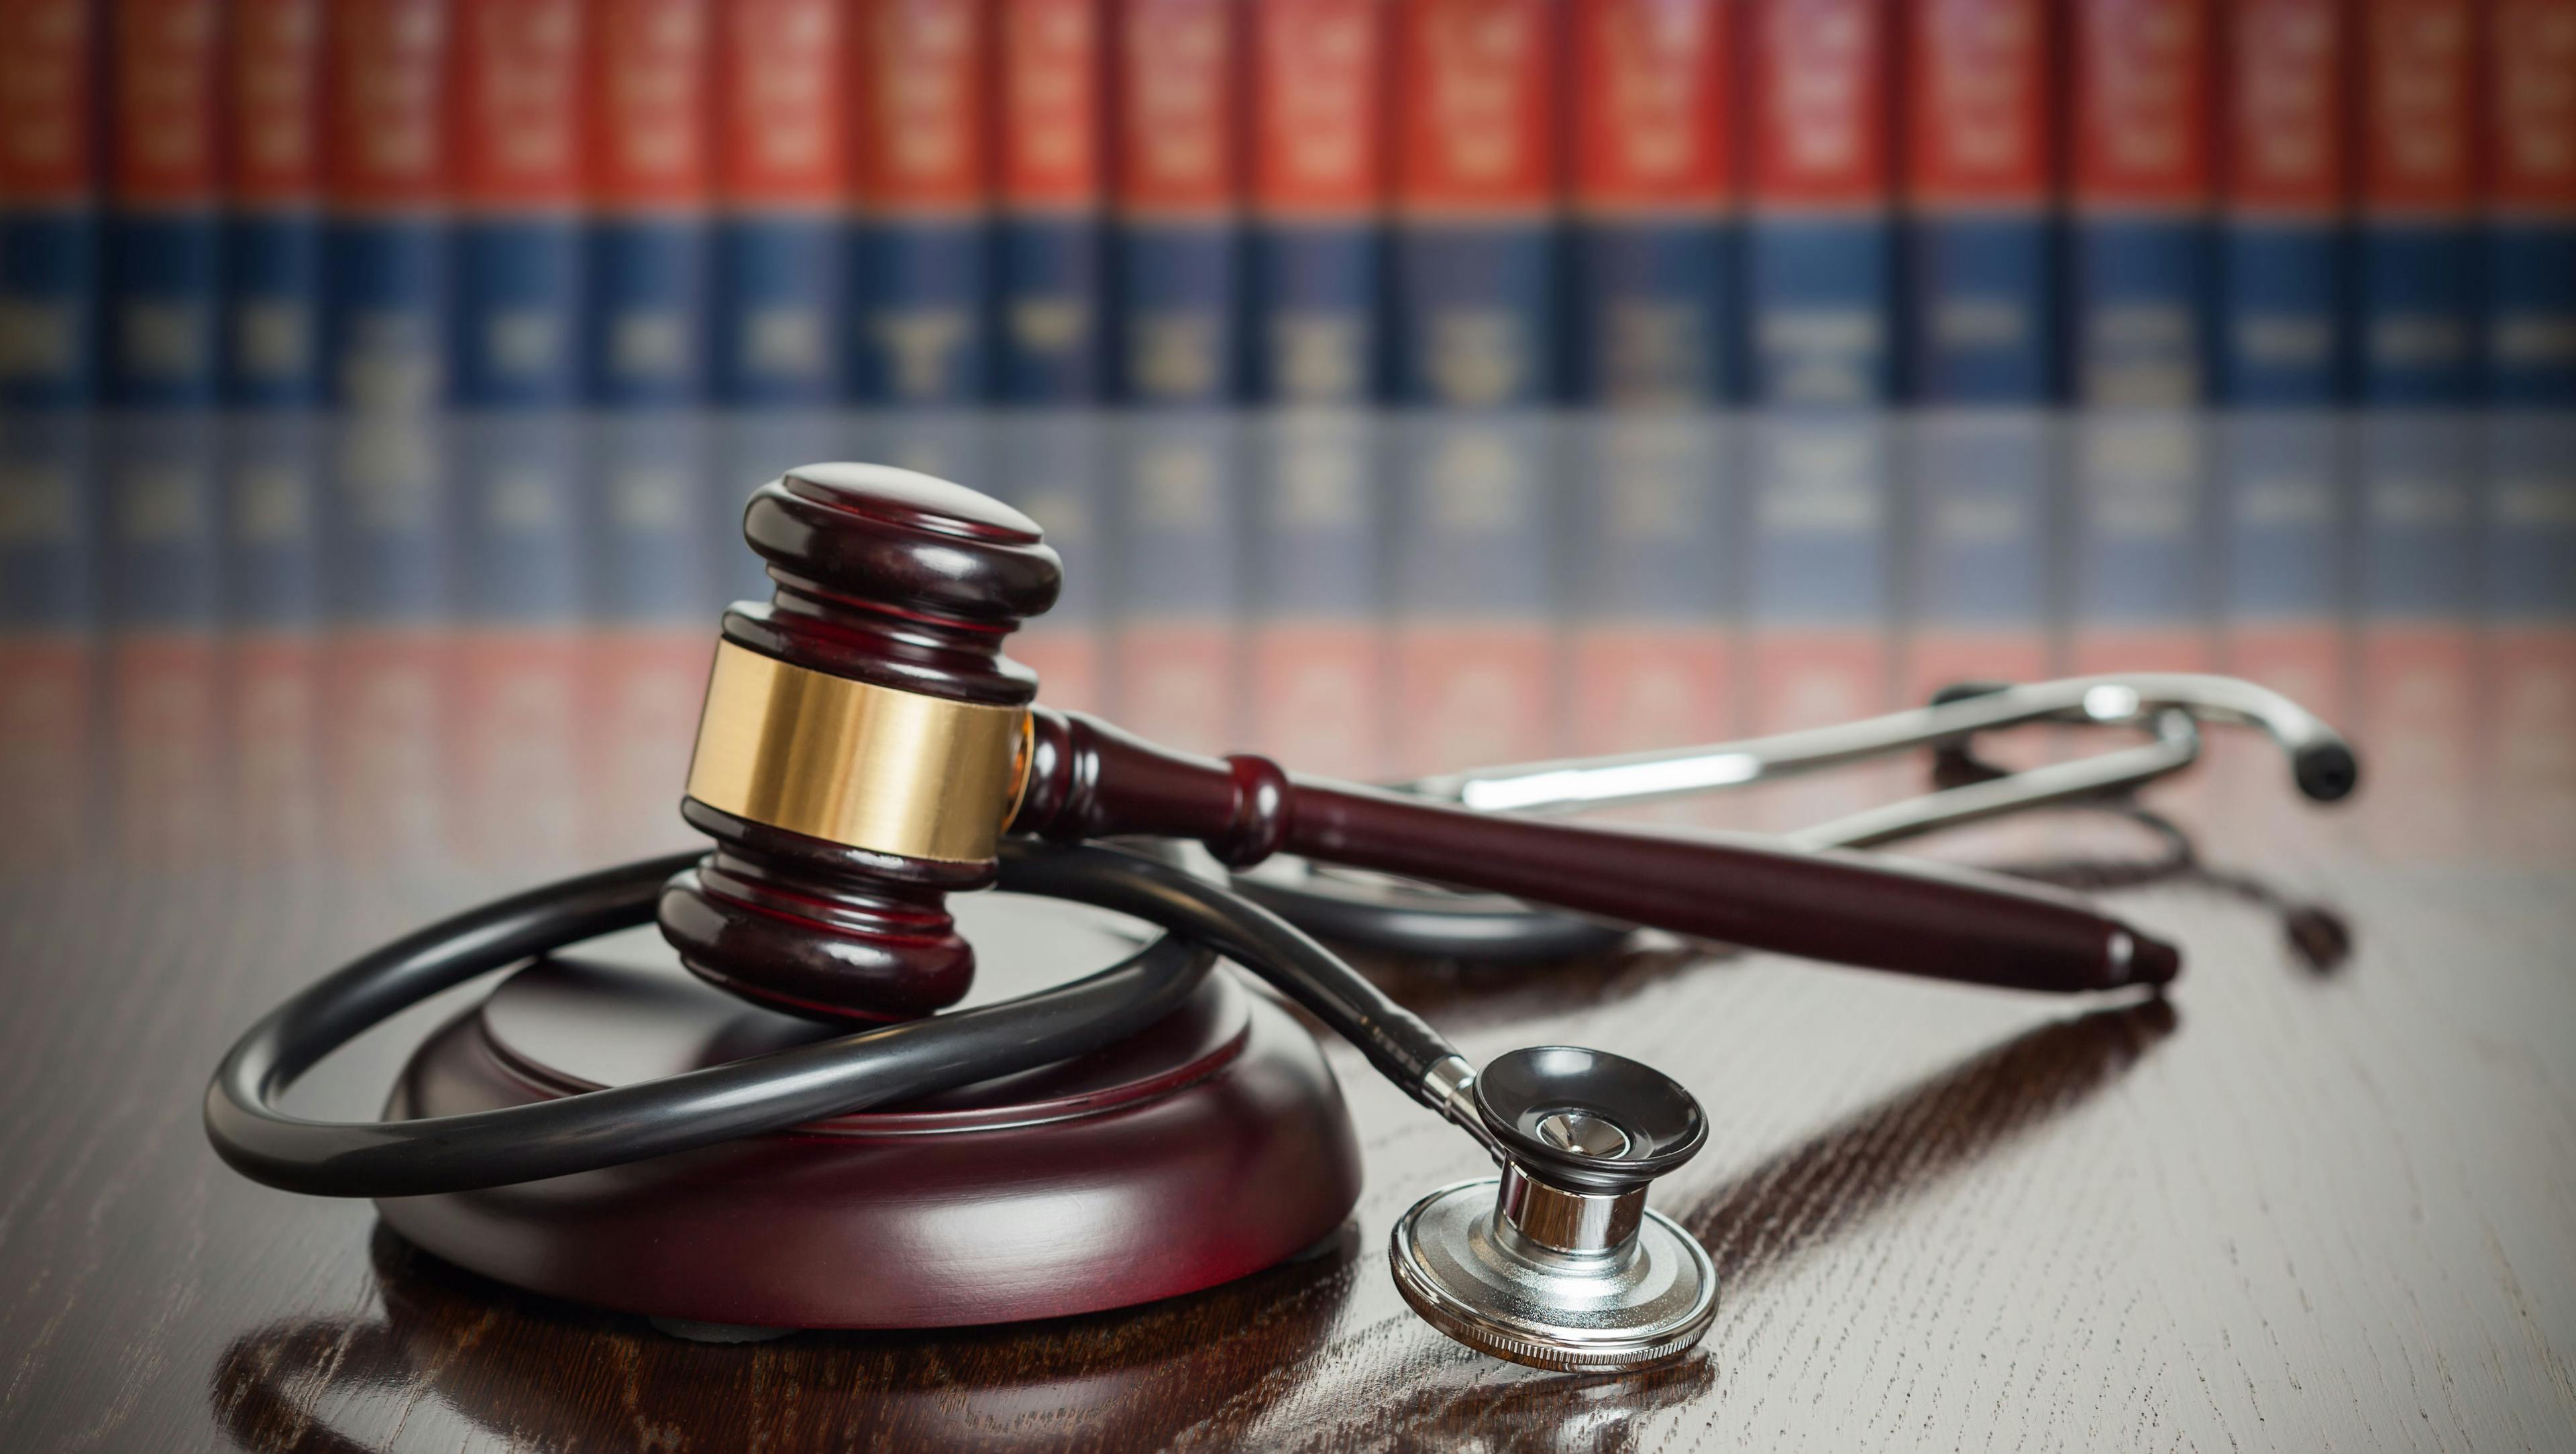  Gavel and Stethoscope | Image credit: Andy Dean - stock.adobe.com